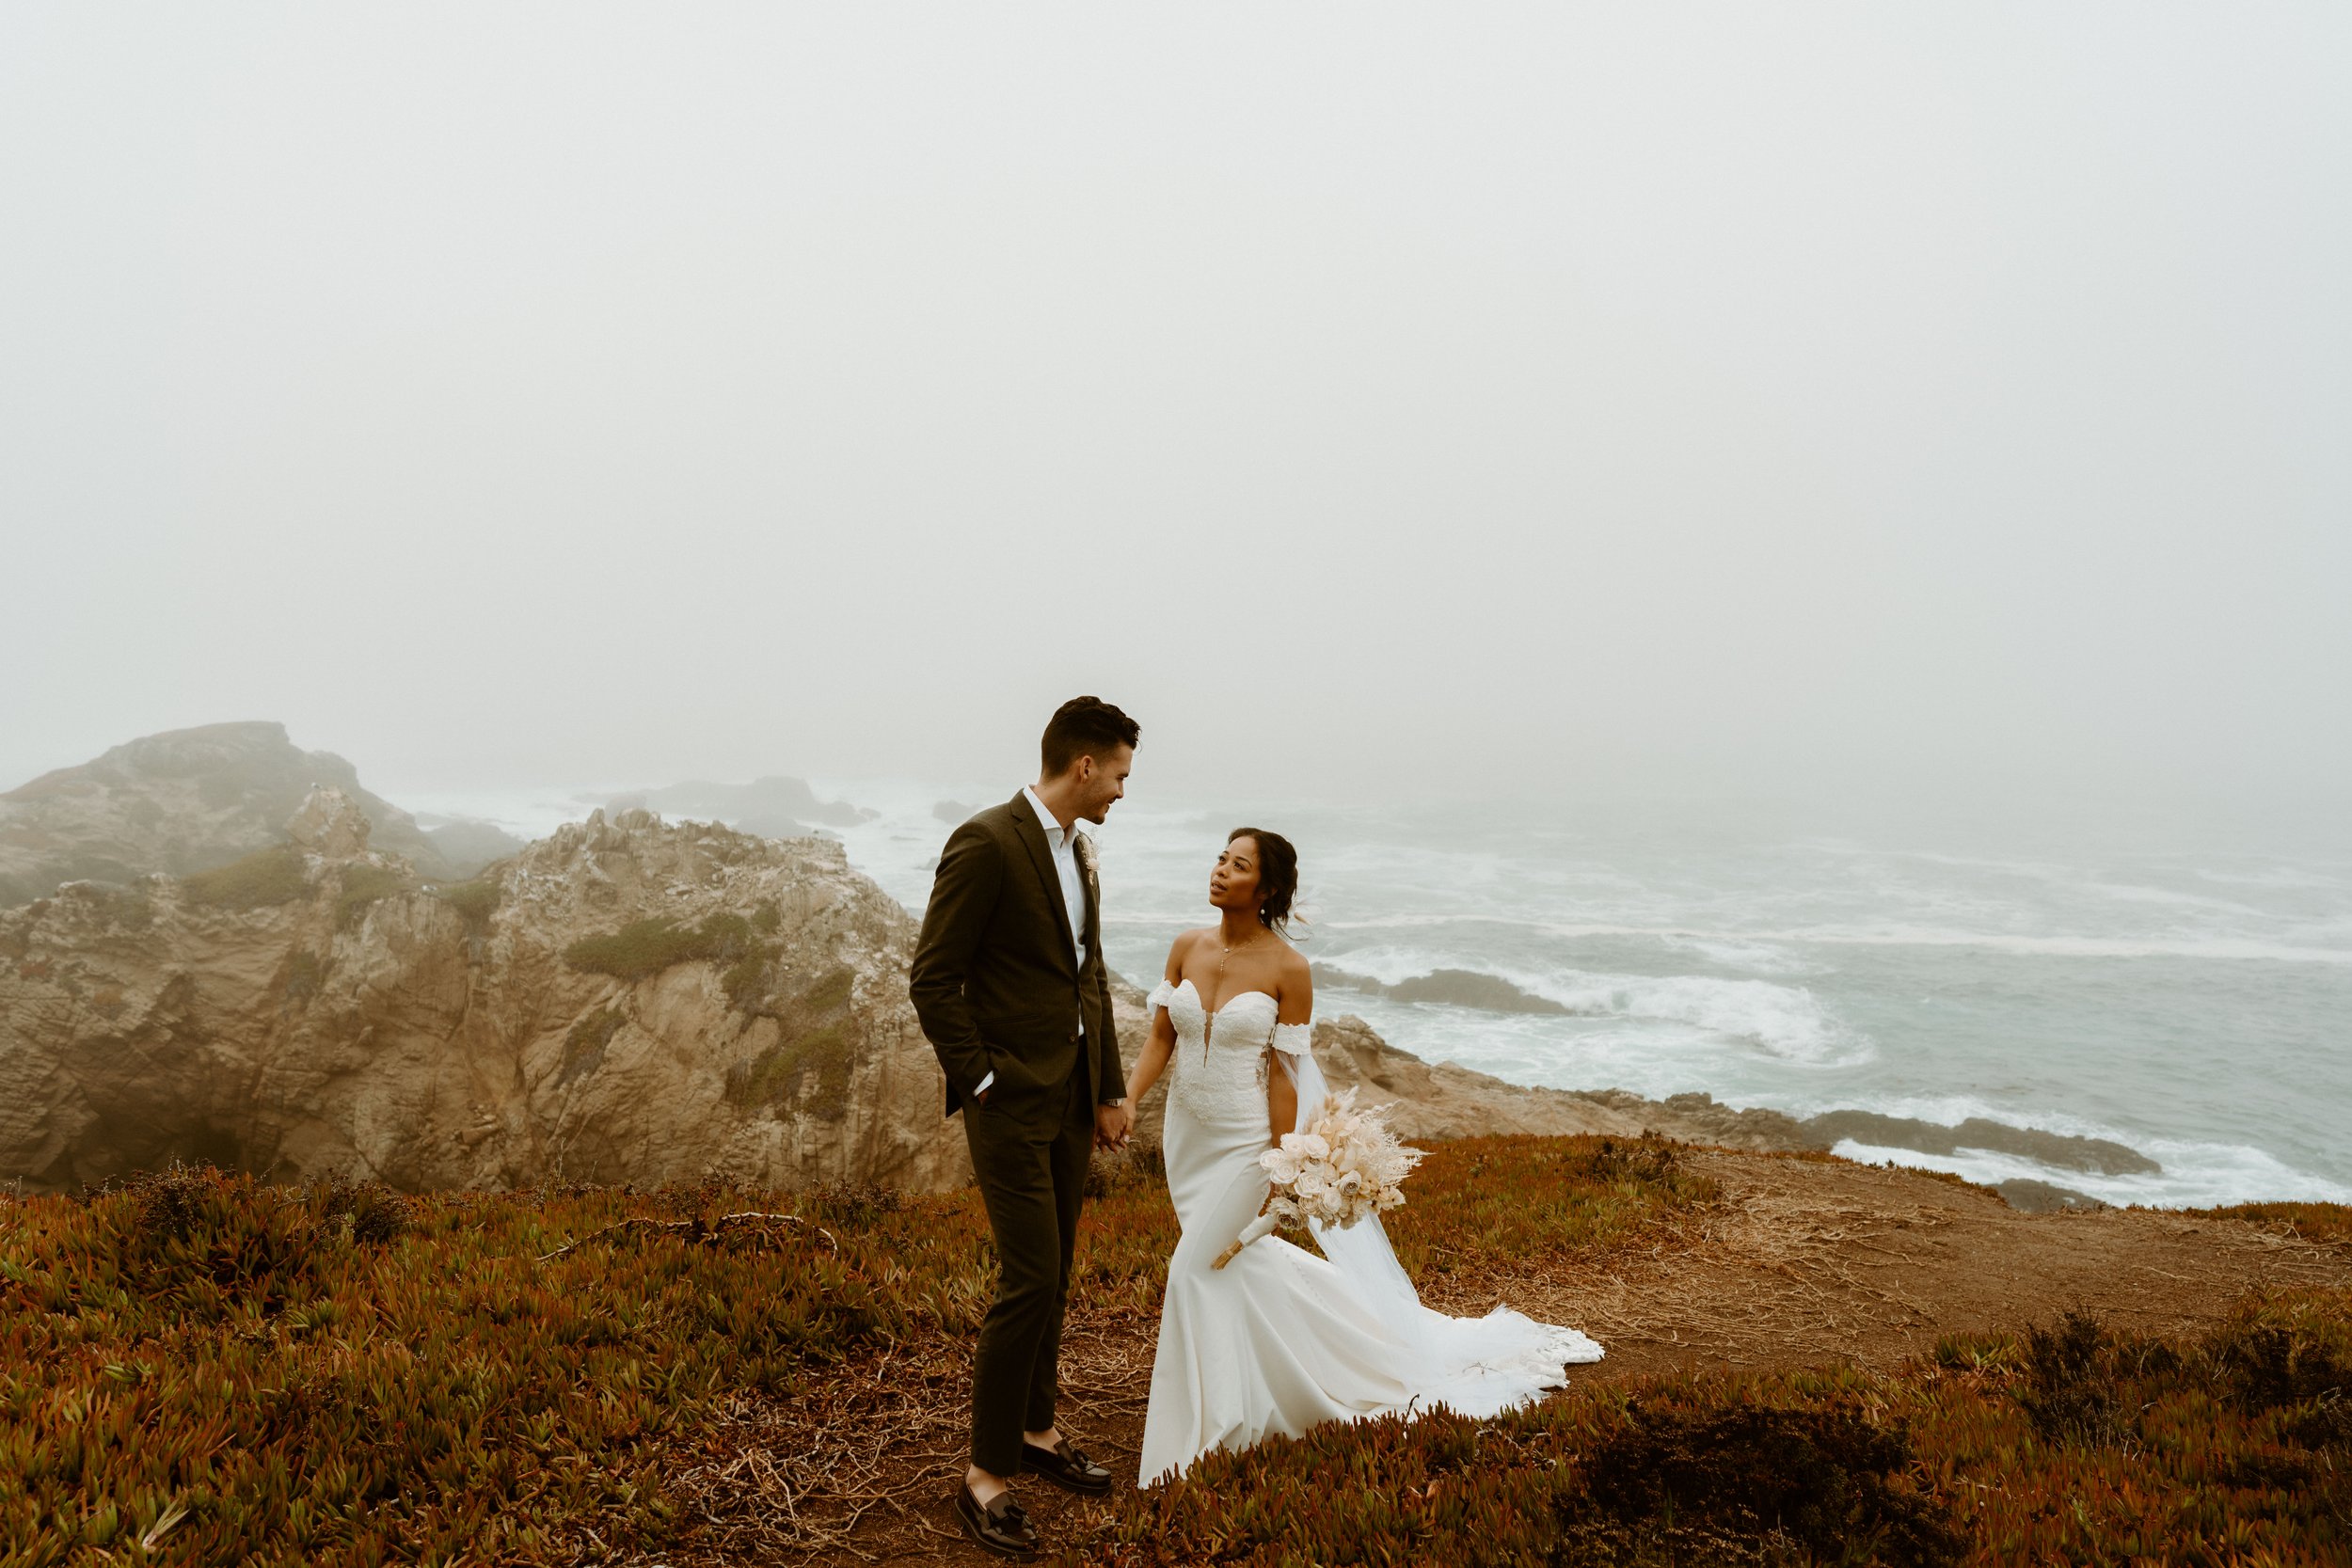 Best Place to Elope in California | Big Sur | Big Sur Elopement Photographer | California Elopement Photographer | Elopement Tips | Big Sur Elopement | Coastal Elopement 